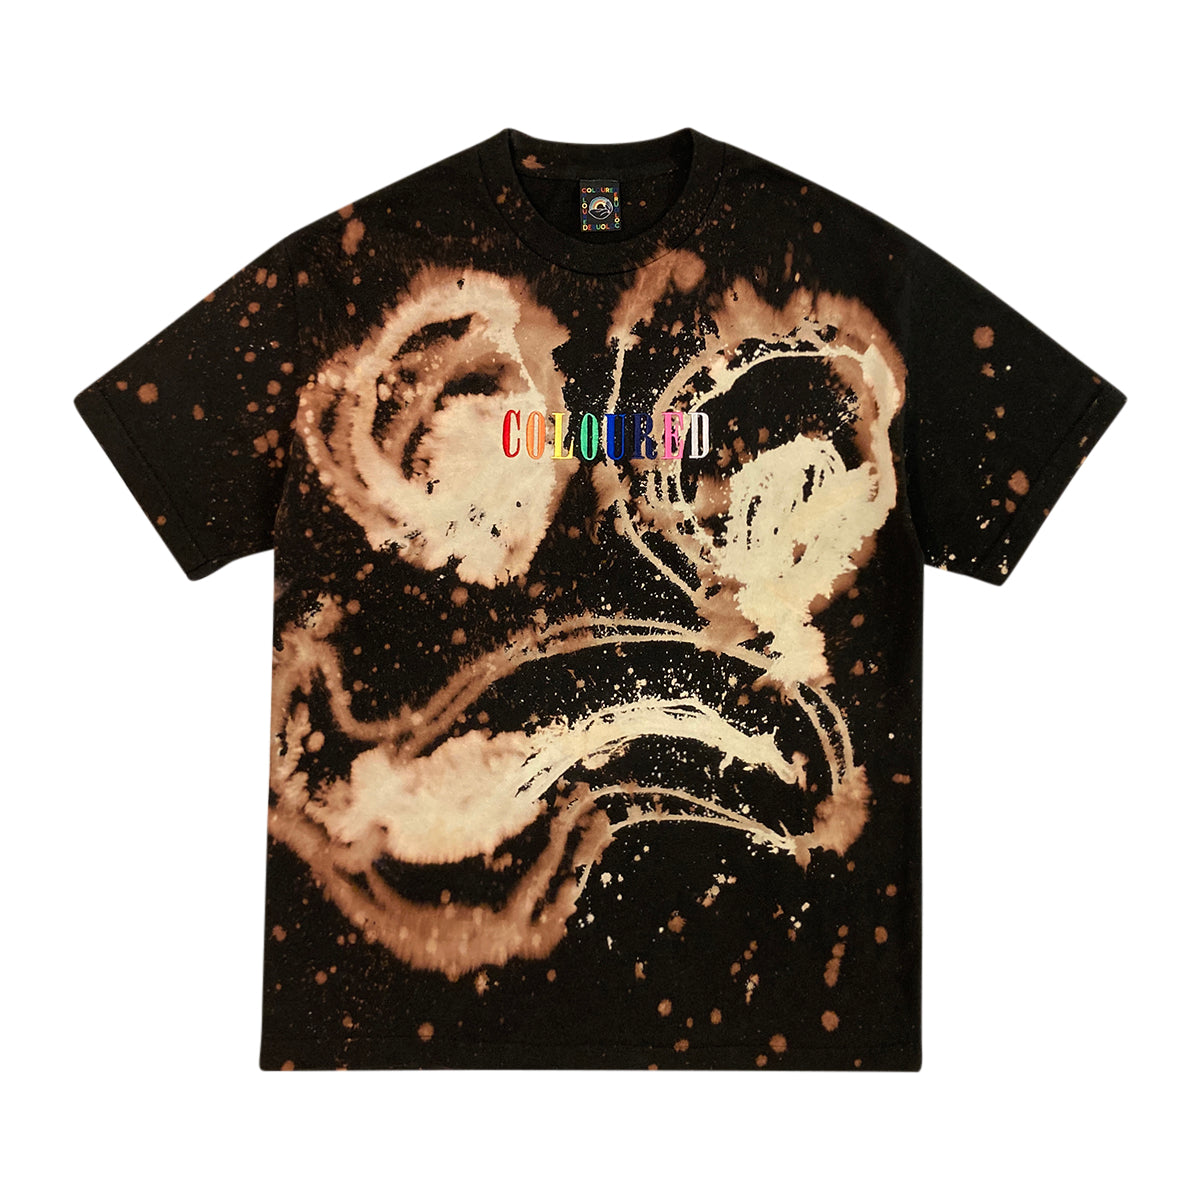 An image of a black t-shirt with a face in beige and "COLOURED" embroidered in rainbow colors.